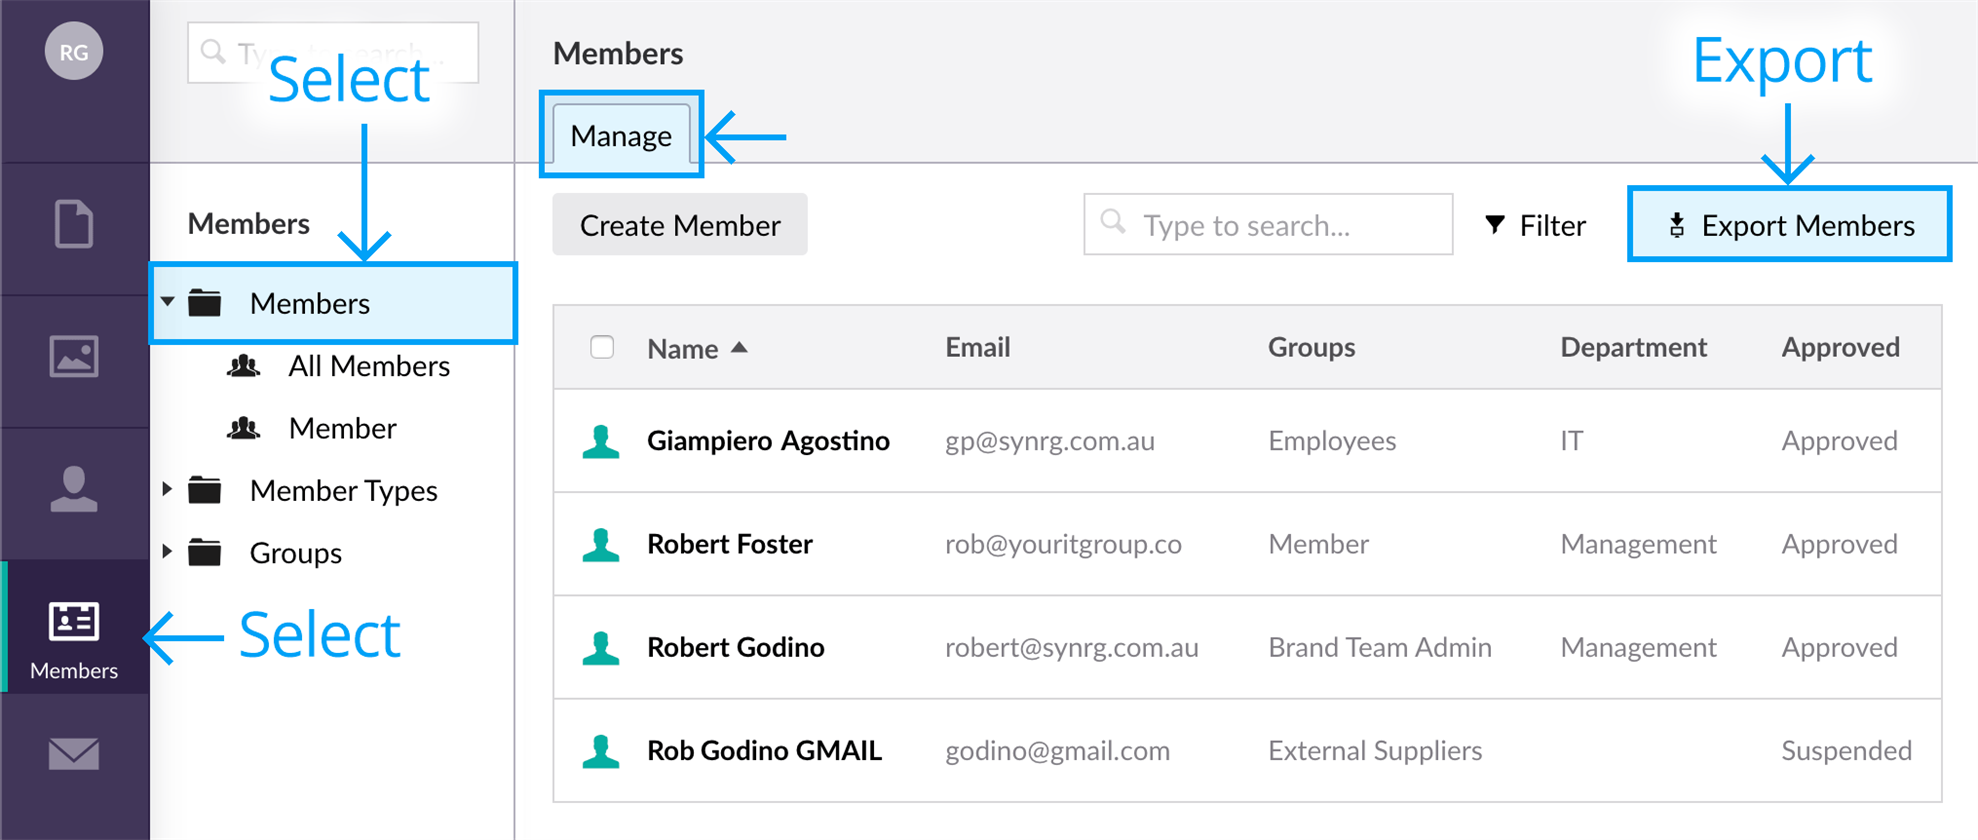 Export members button in the members backoffice area